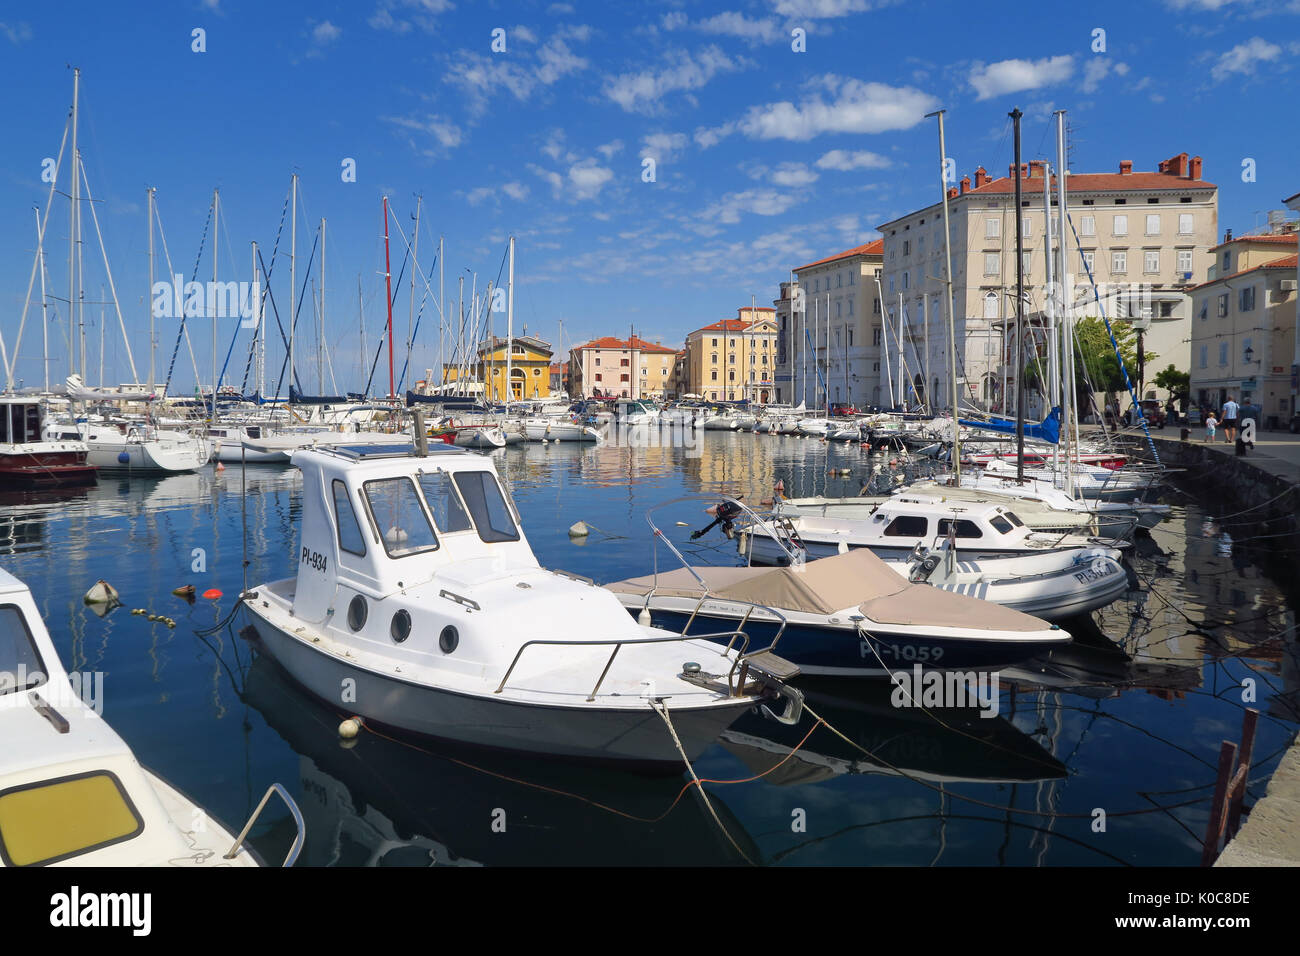 Waterfront in the Slovenian town of Piran Stock Photo